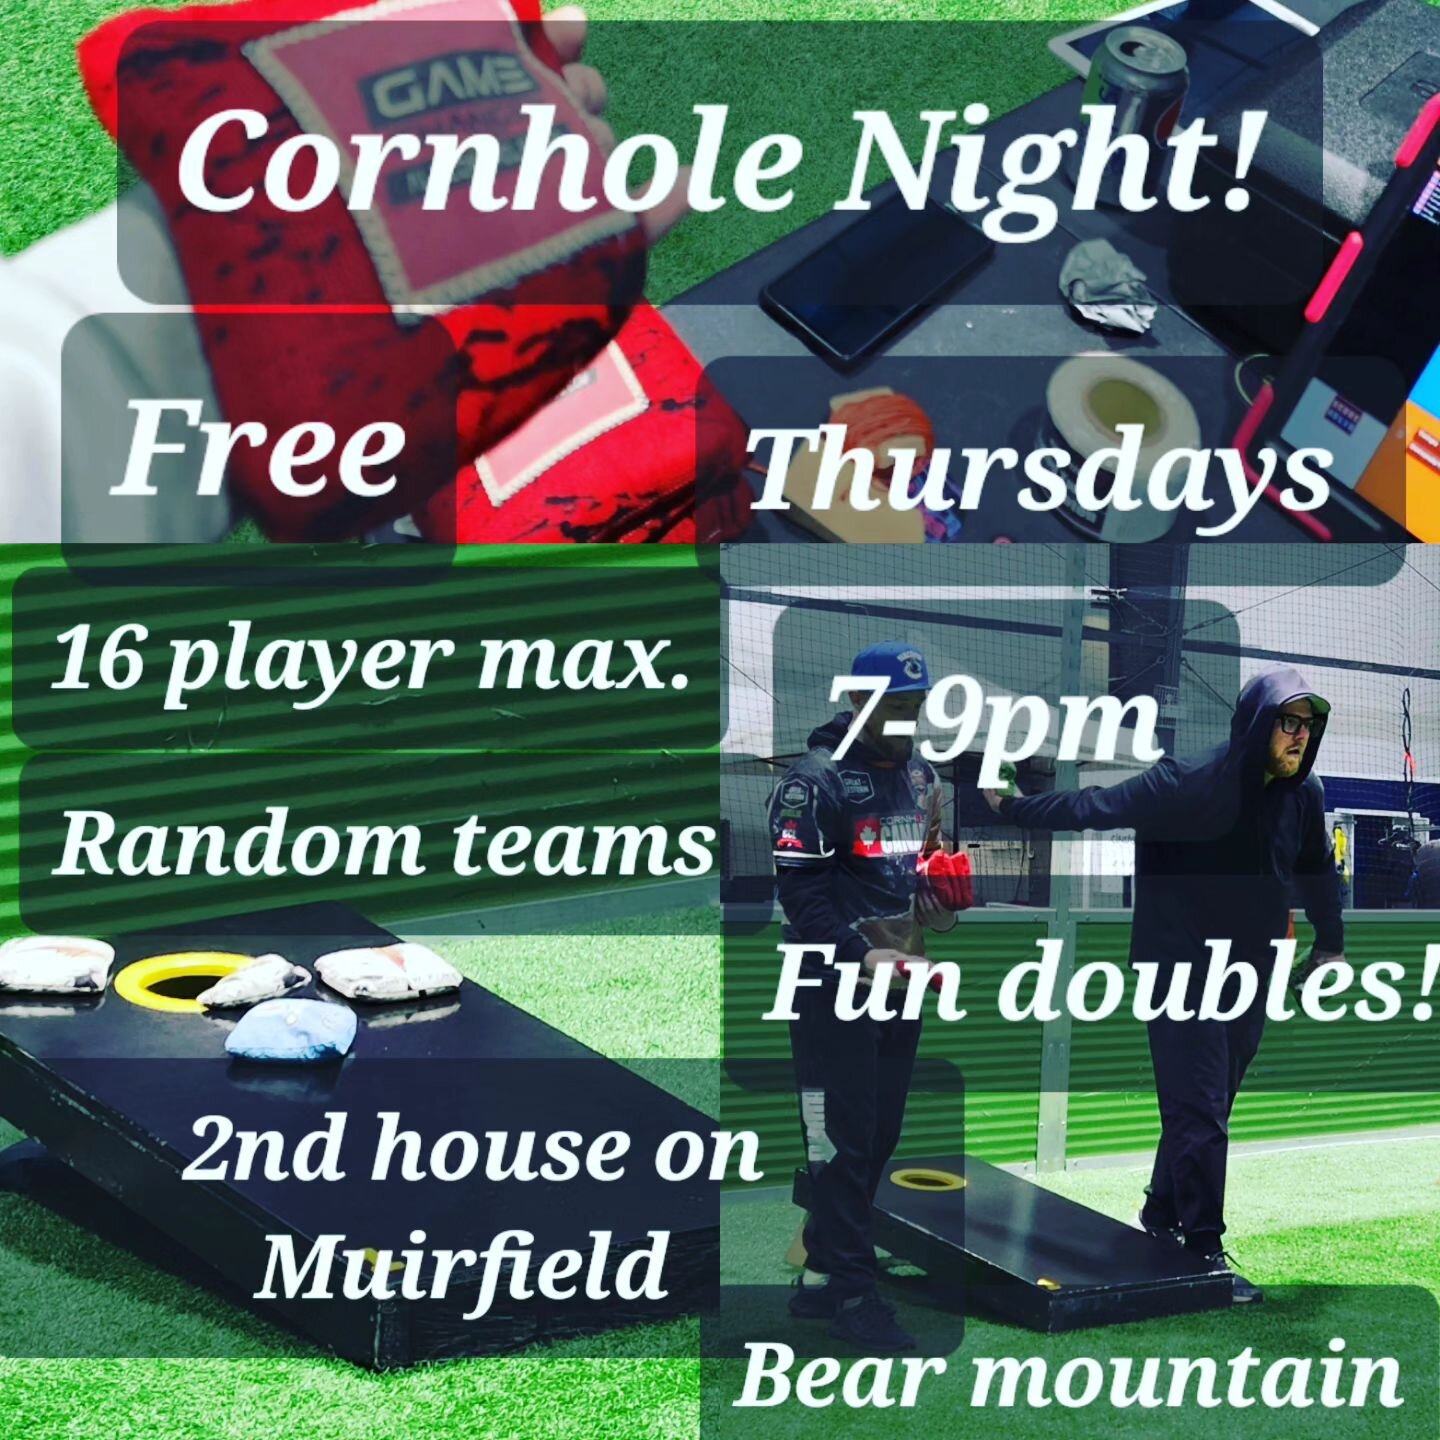 Thursday night cornhole. Come on out for some free fun!